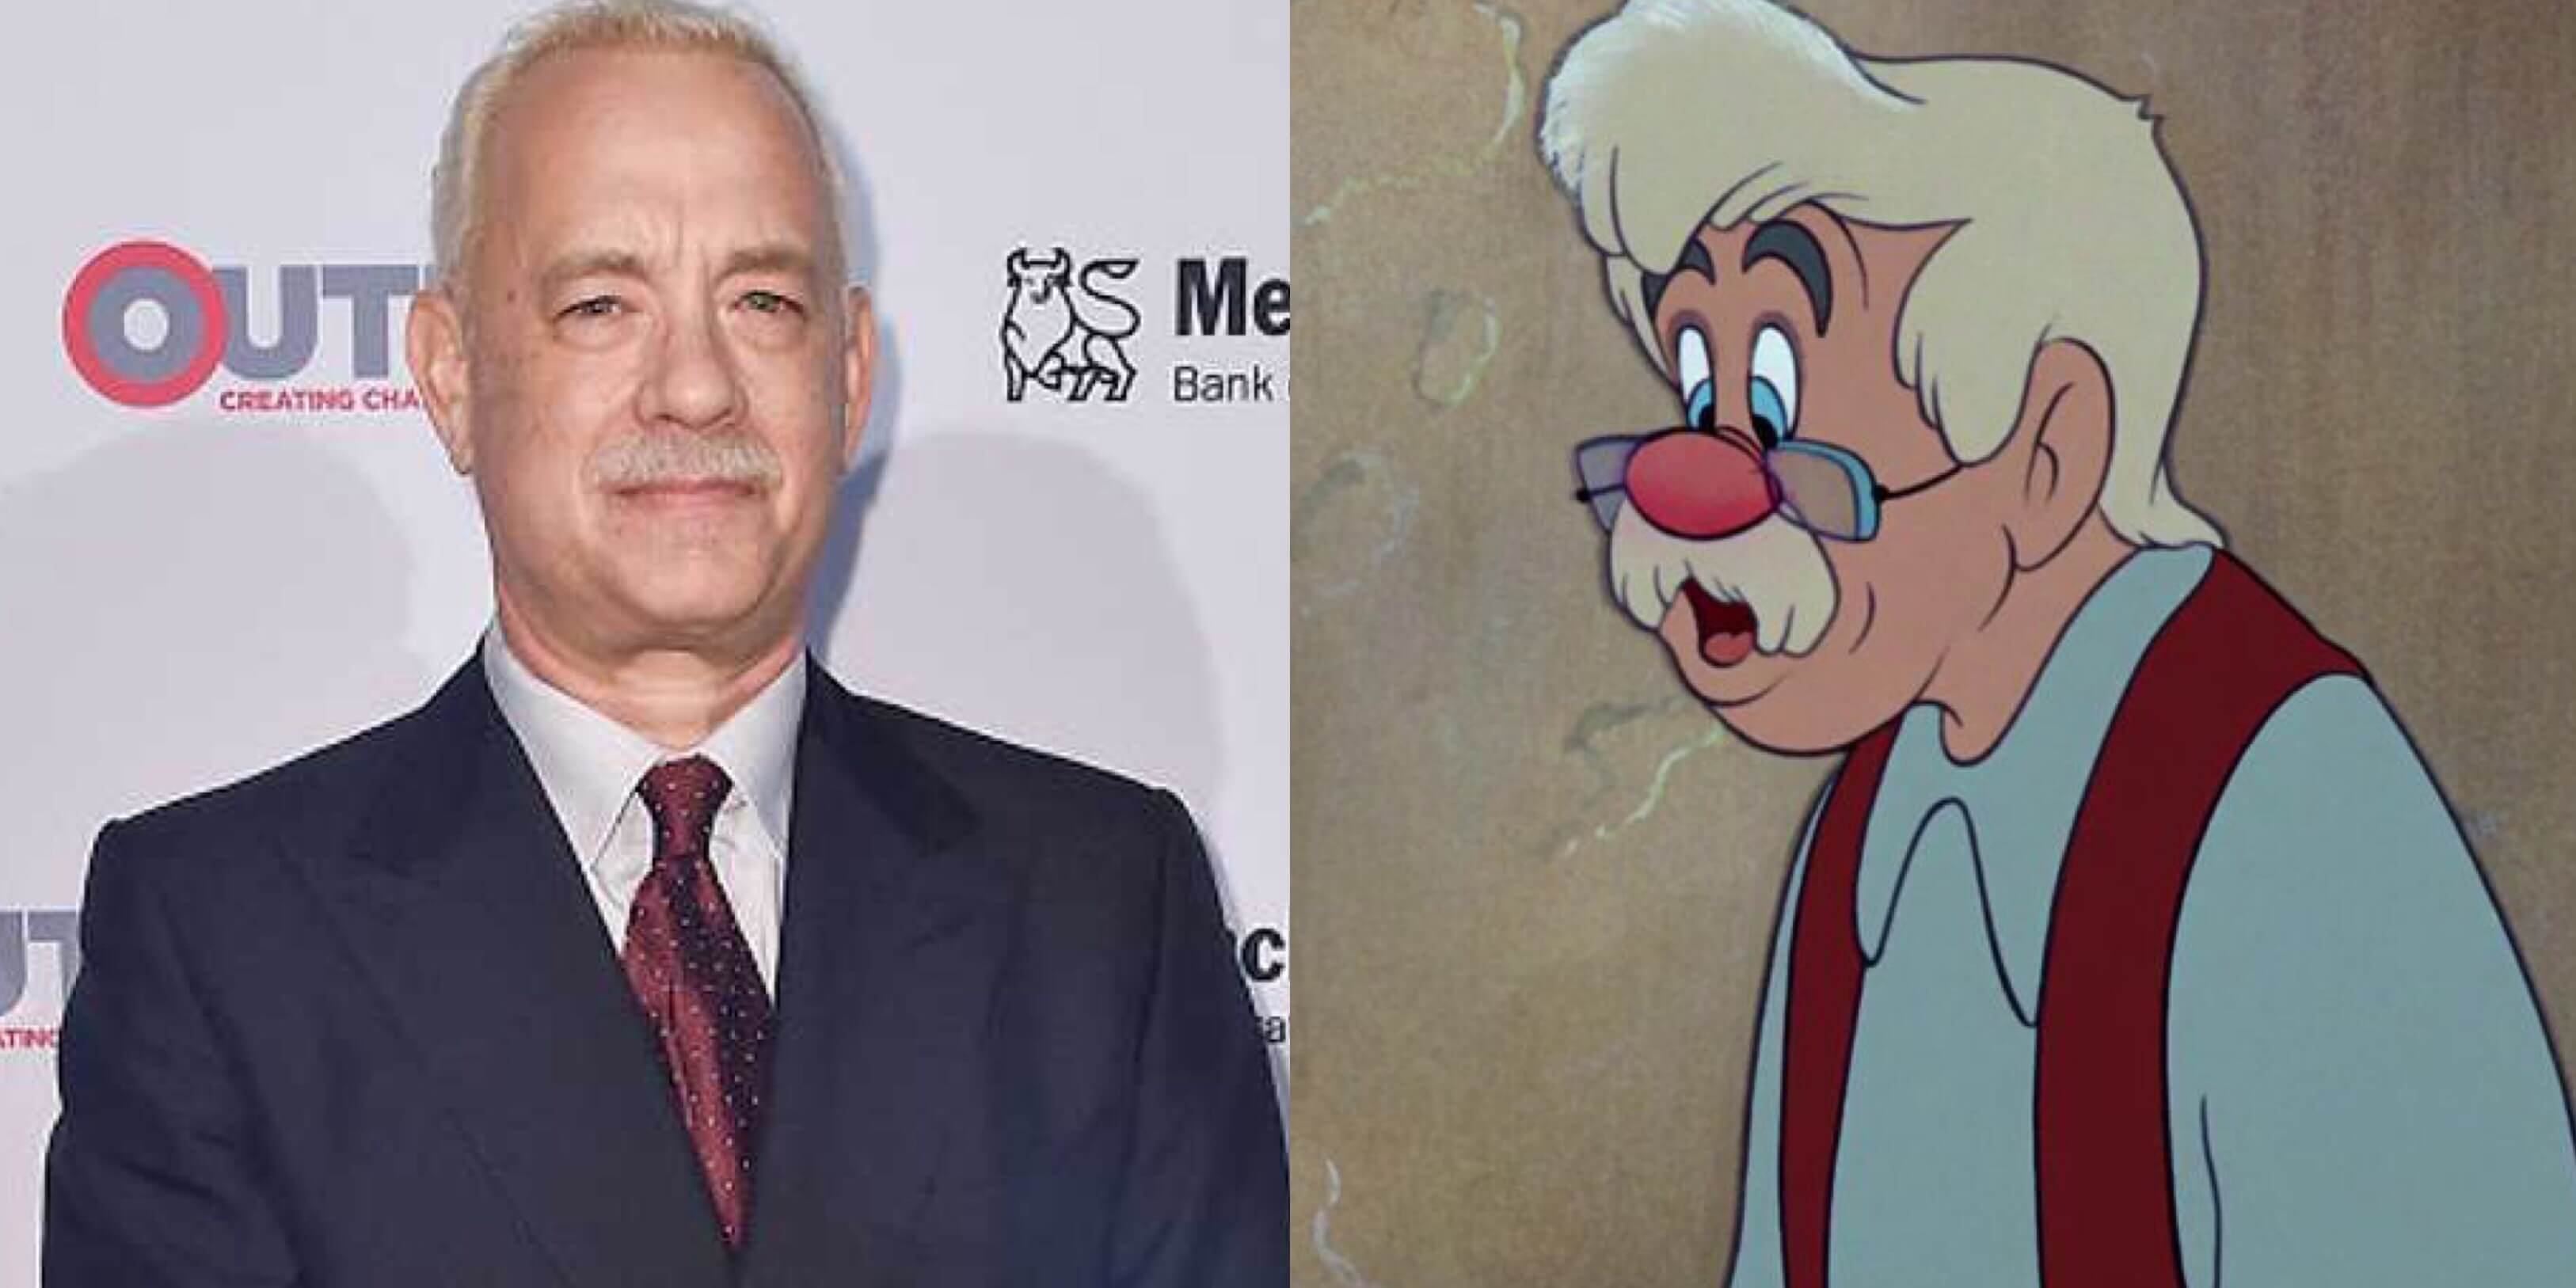 Tom Hanks In Talks To Play Geppetto In Disney’s Live-Action ‘Pinocchio’